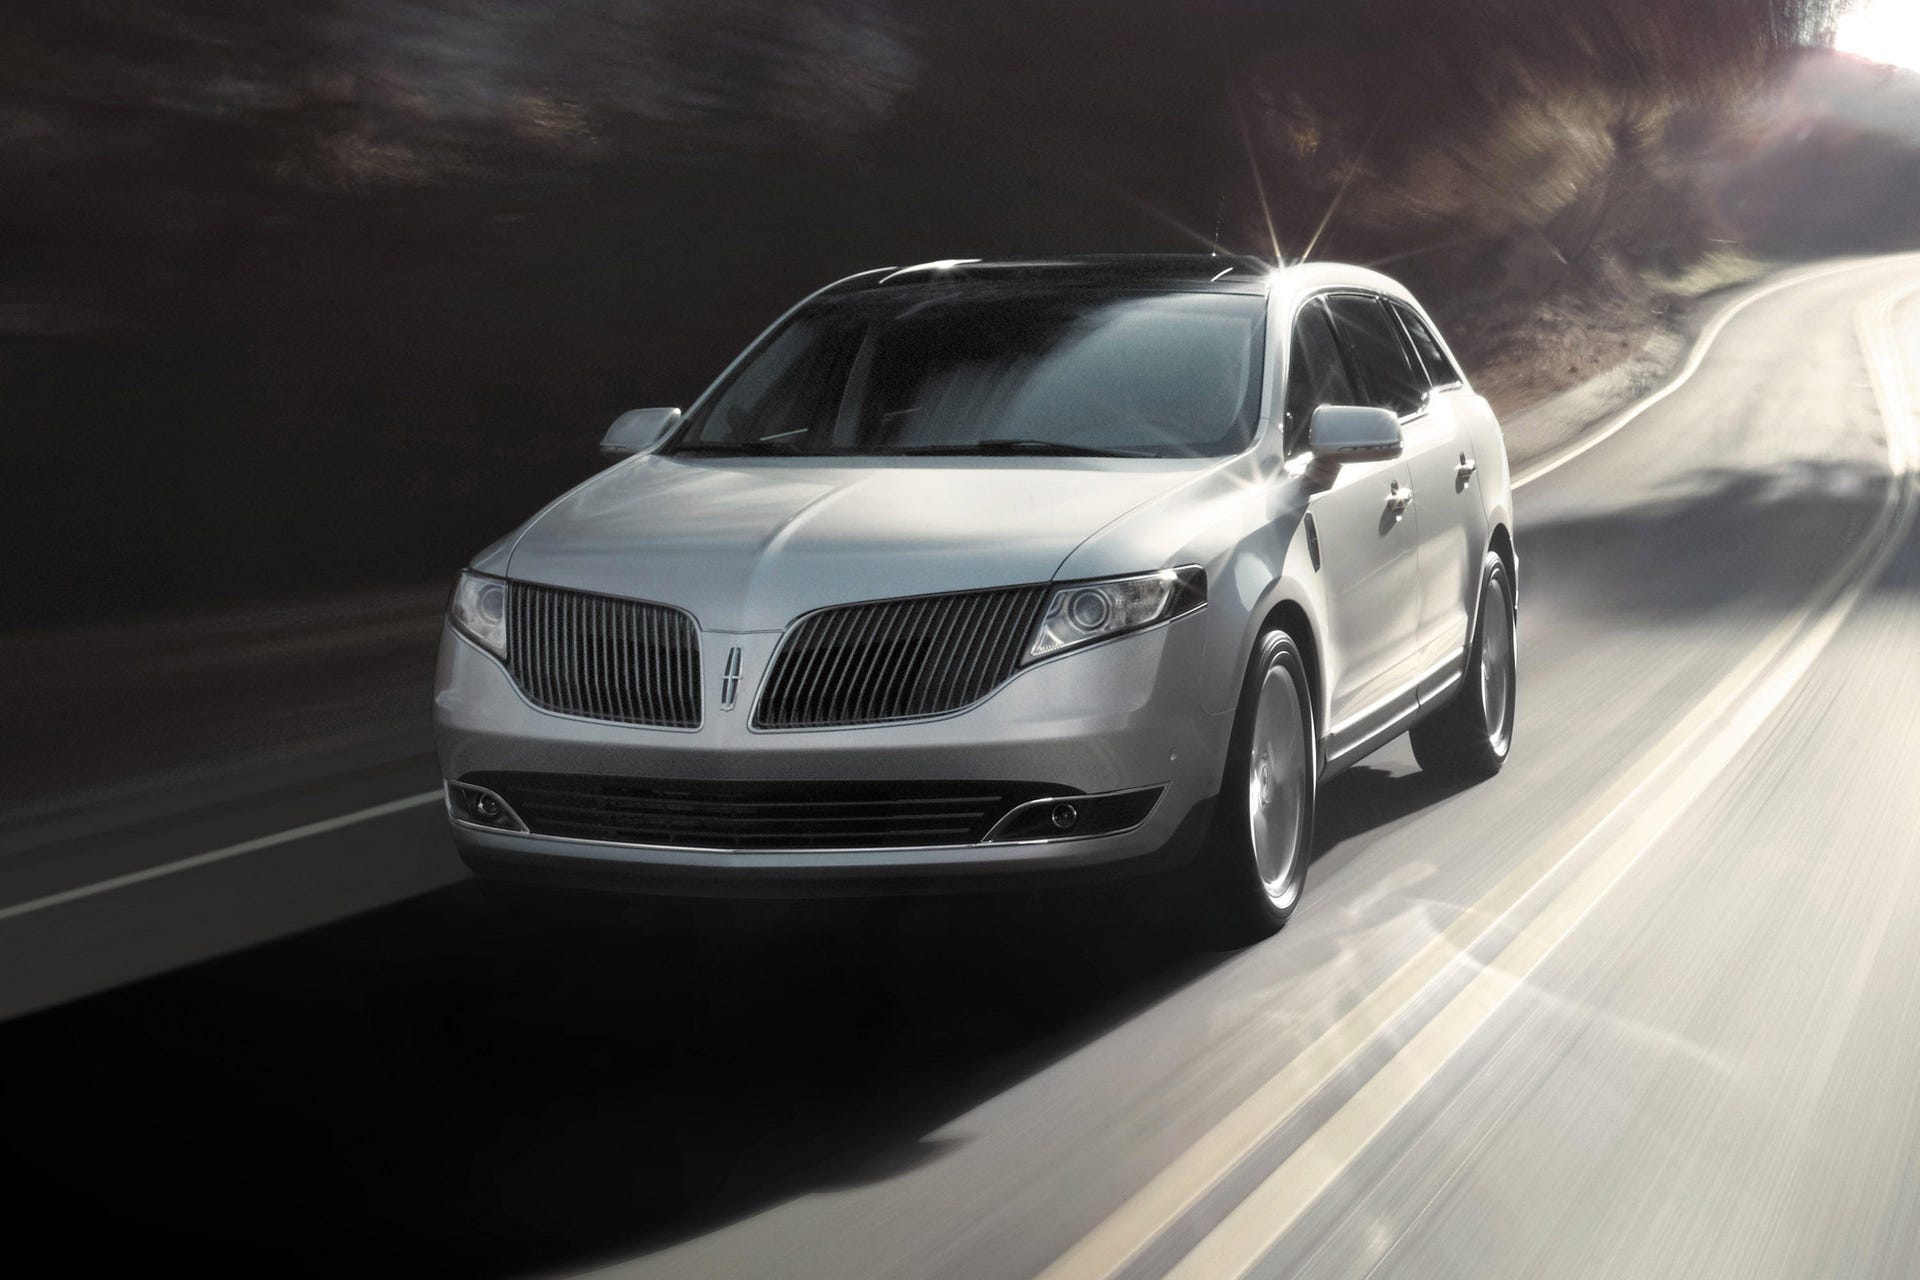 The Lincoln MKT will never die - CNET